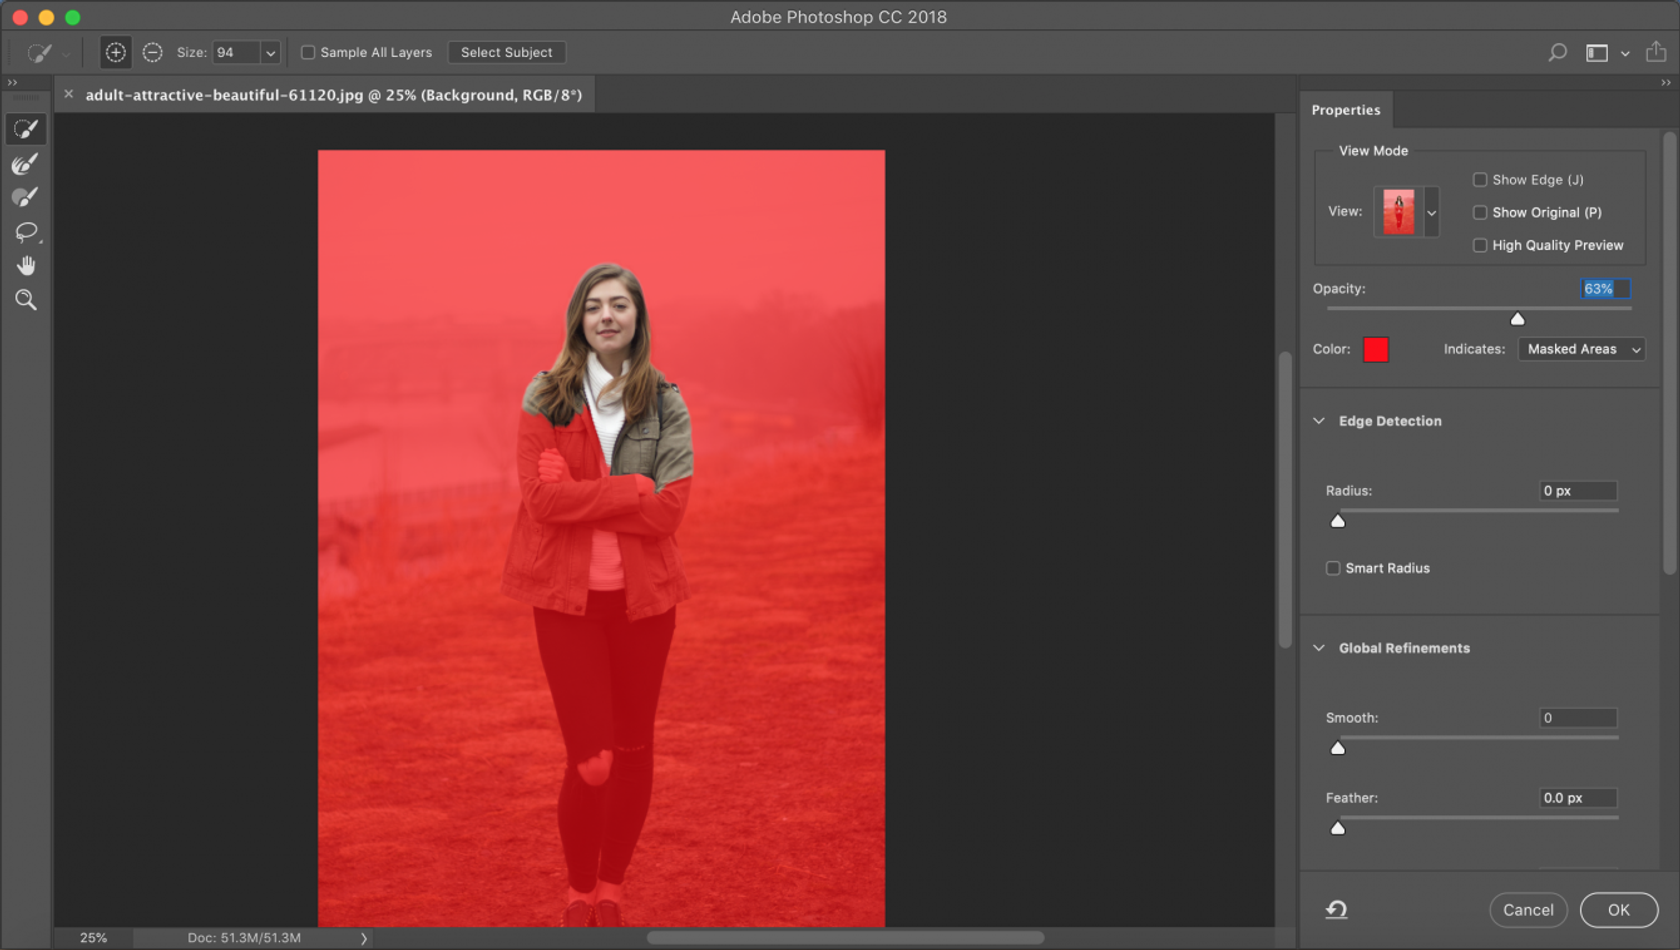 How to Smooth Edges in Photoshop: Photoshop Feather and Other Tools Image5